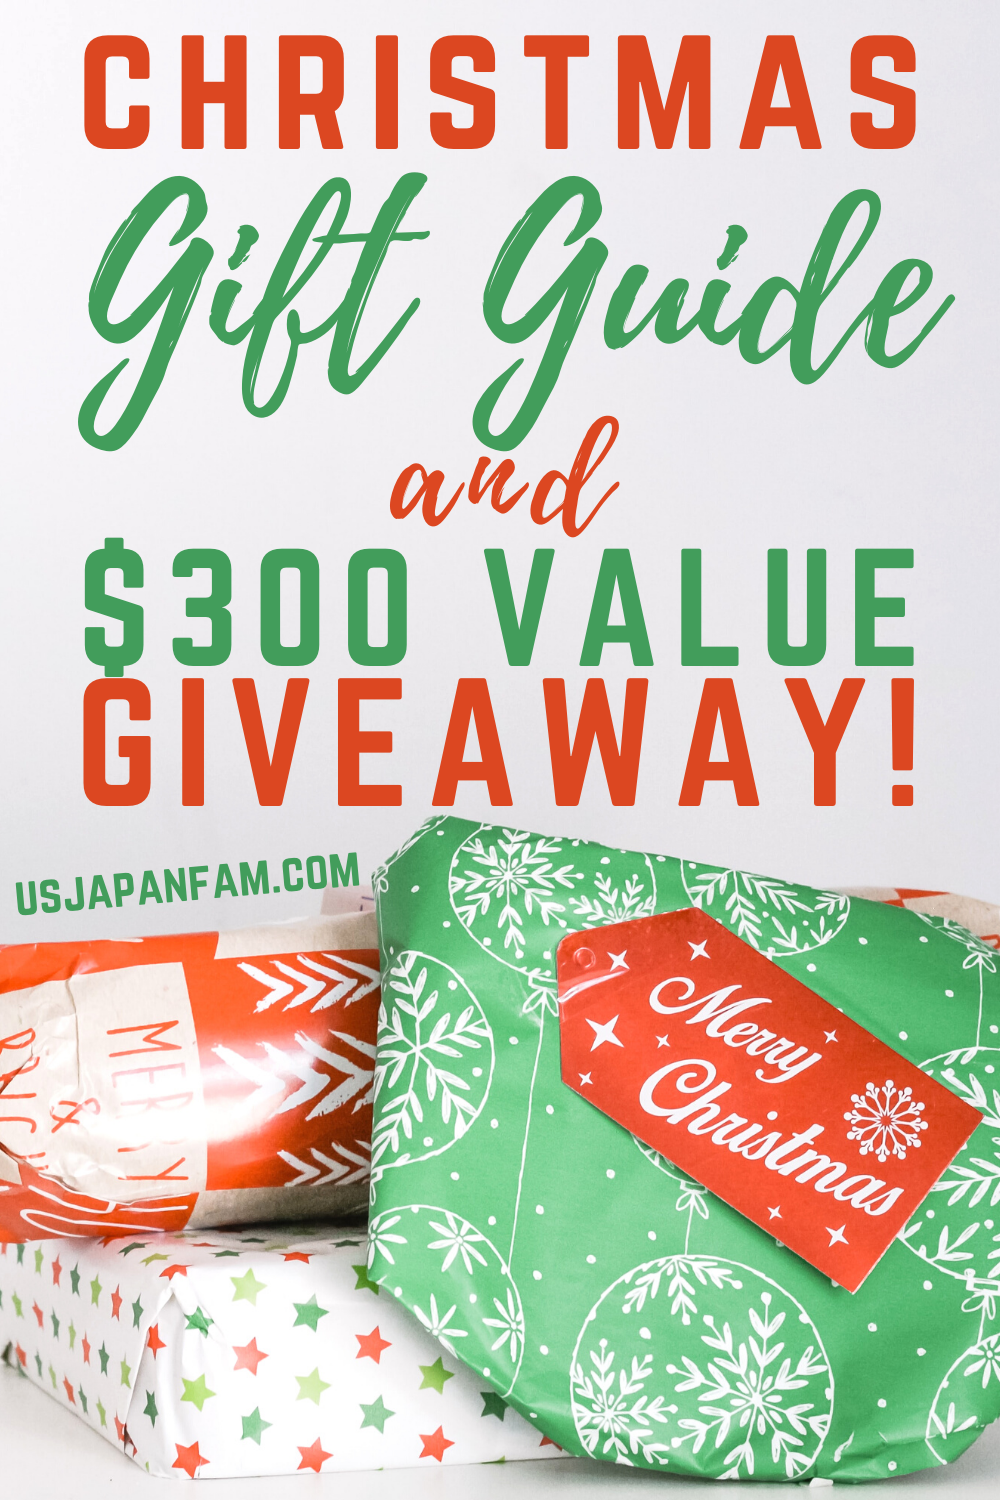 US Japan Fam's 2021 Christmas Gift Guide & Giveaway